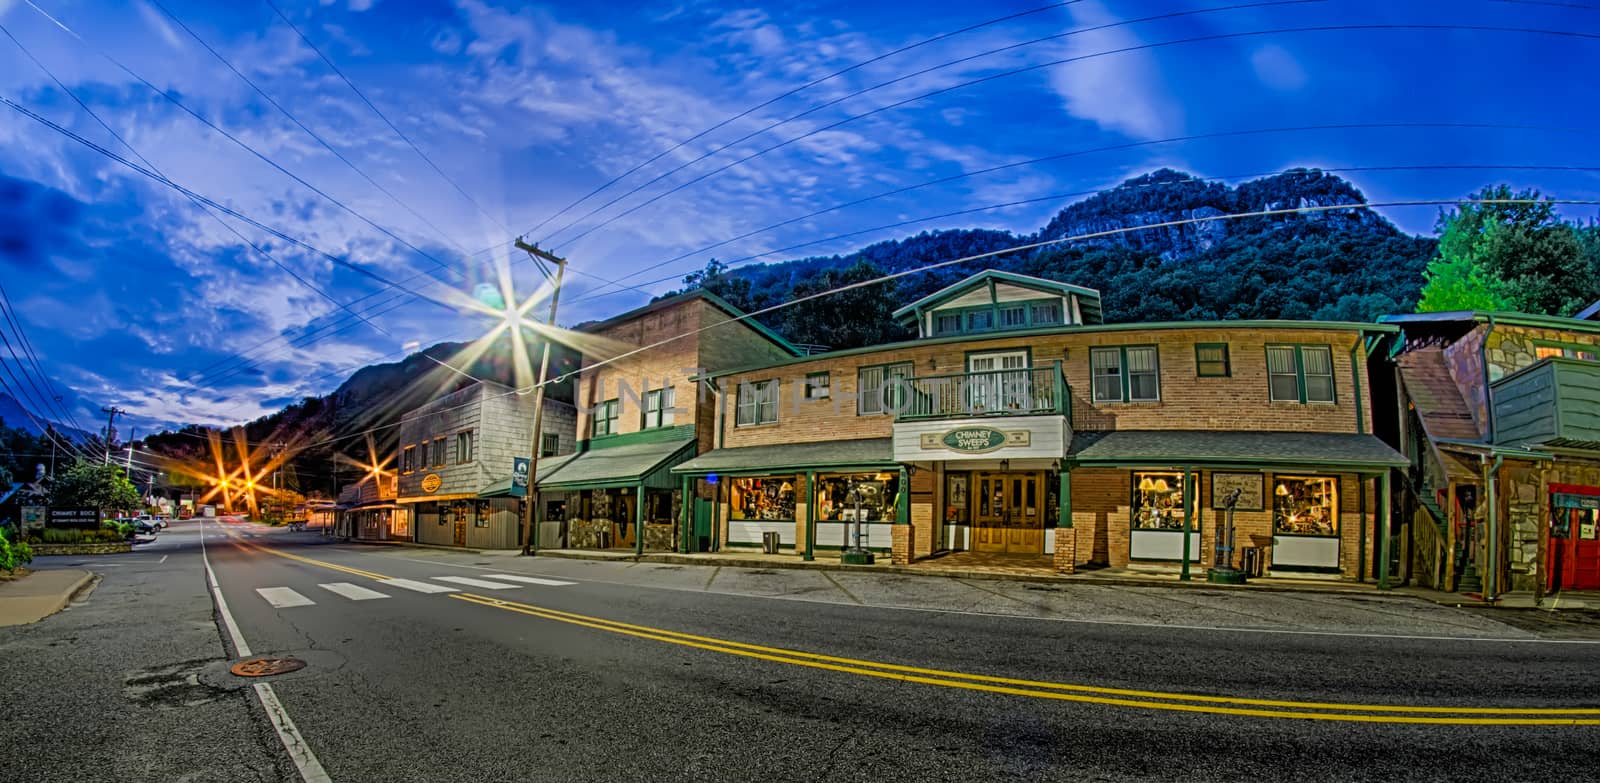 town of chimney rock in north carolina near lake lure by digidreamgrafix